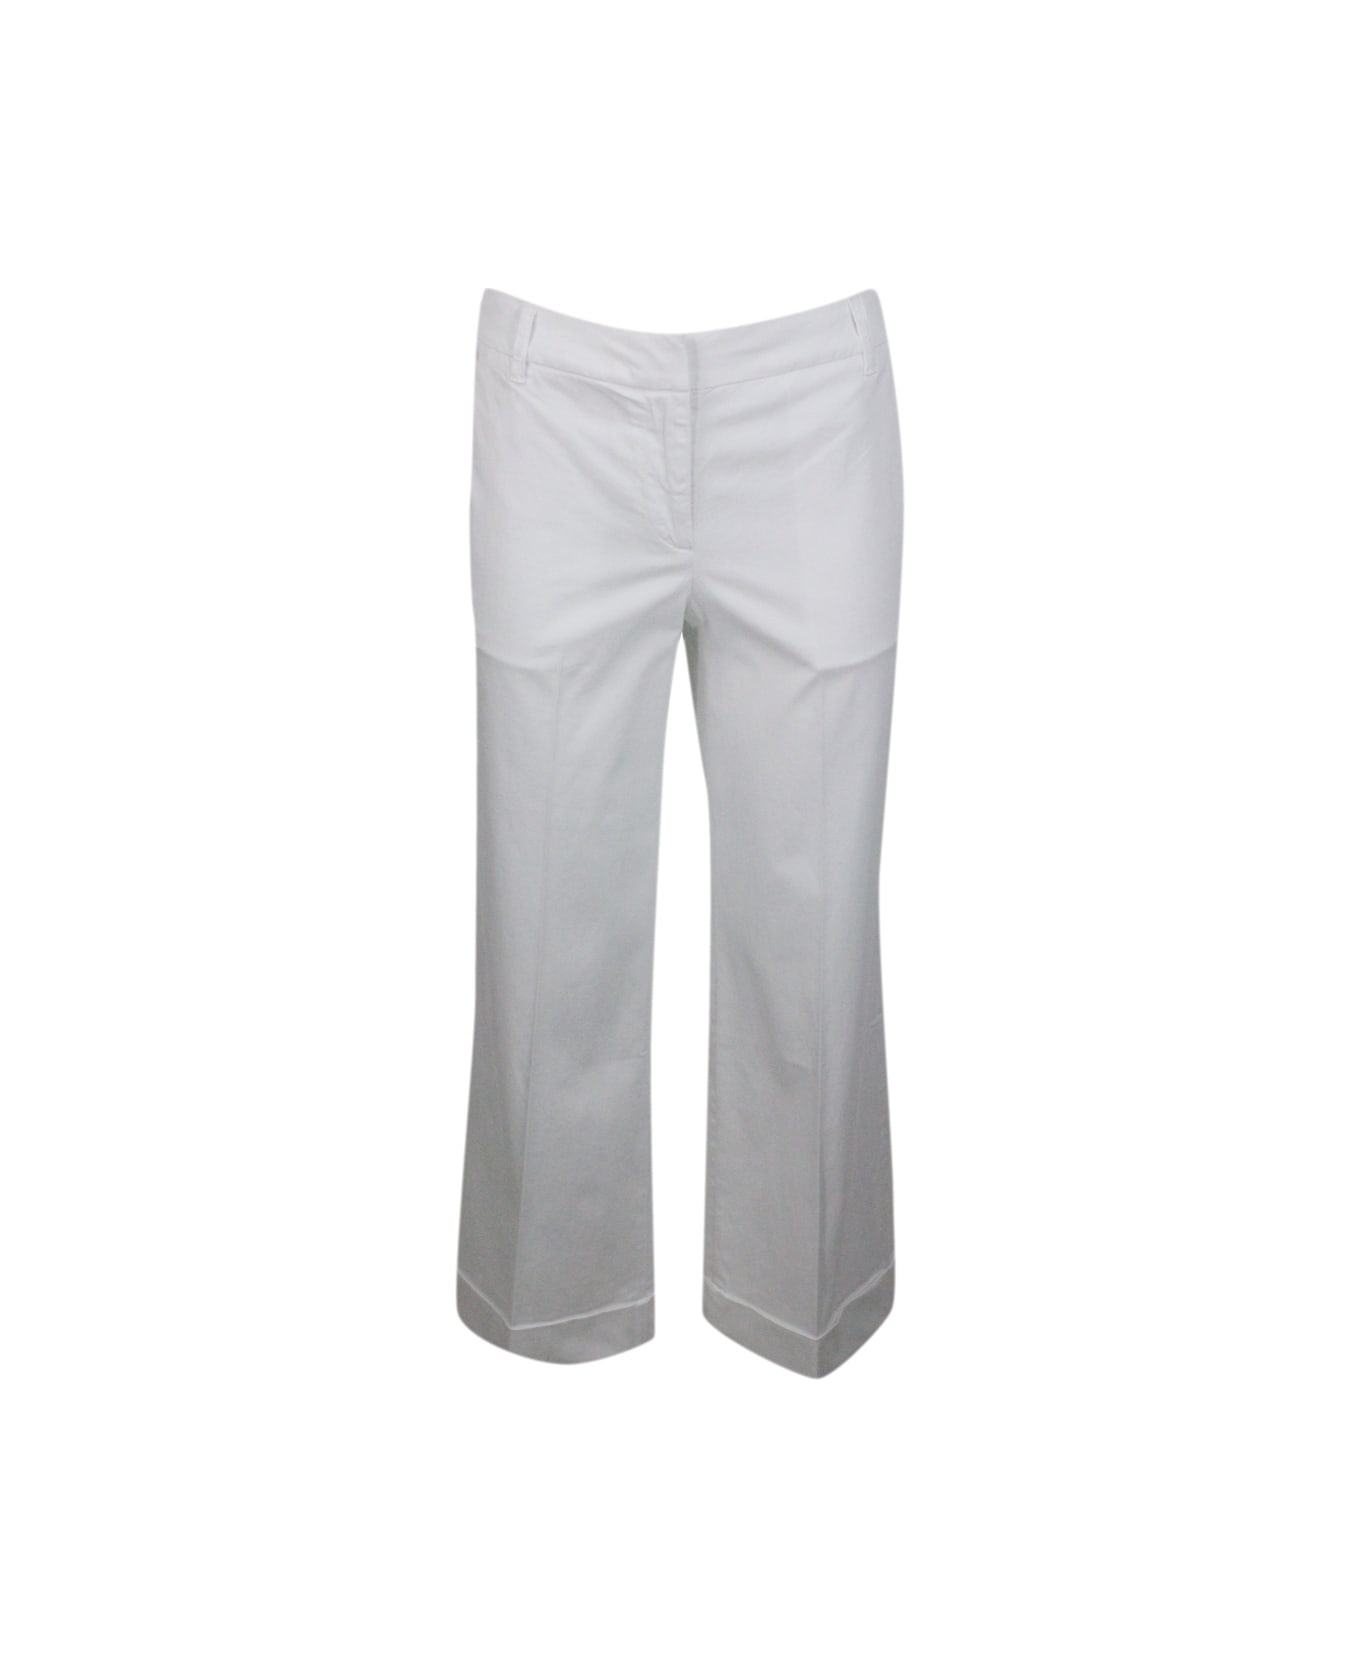 Jacob Cohen Luxury Edition Selena Cropped Trousers In Soft Stretch Cotton With Chinos America Pockets With Zip Closure And Small Logo Above The Back Pocket - White ボトムス